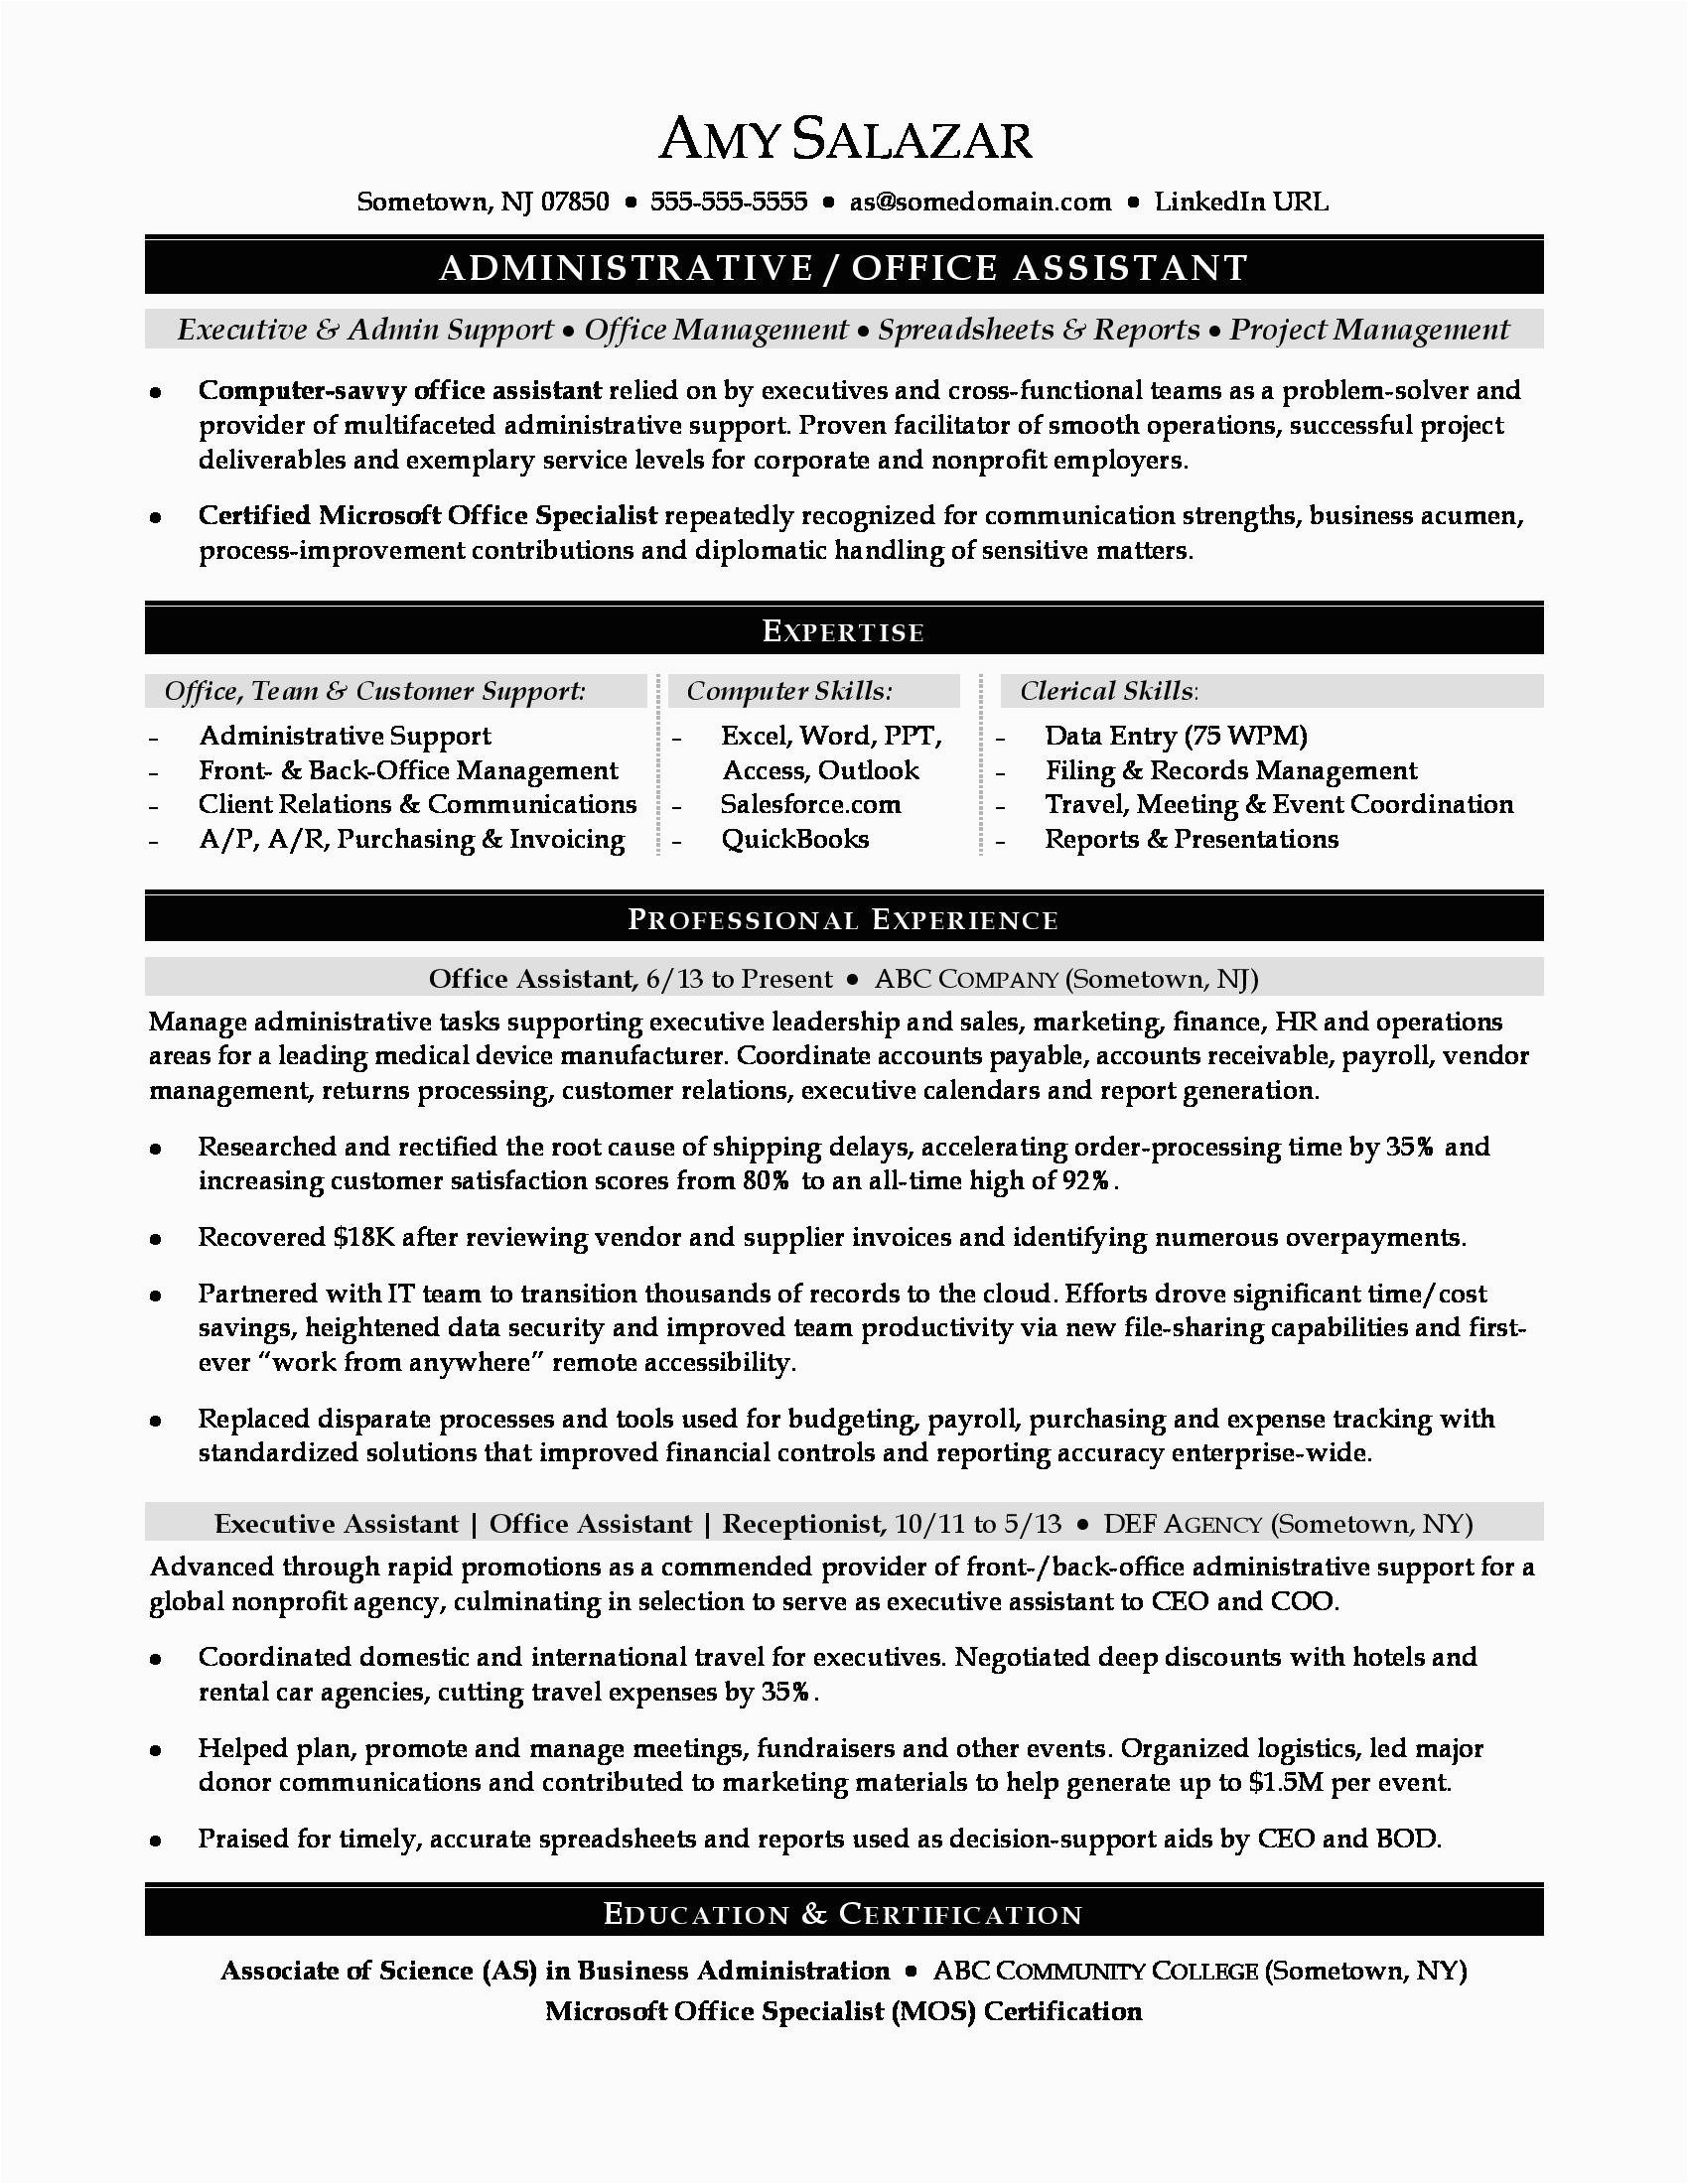 Resume Samples for Office assistant Job Fice assistant Sample Resume